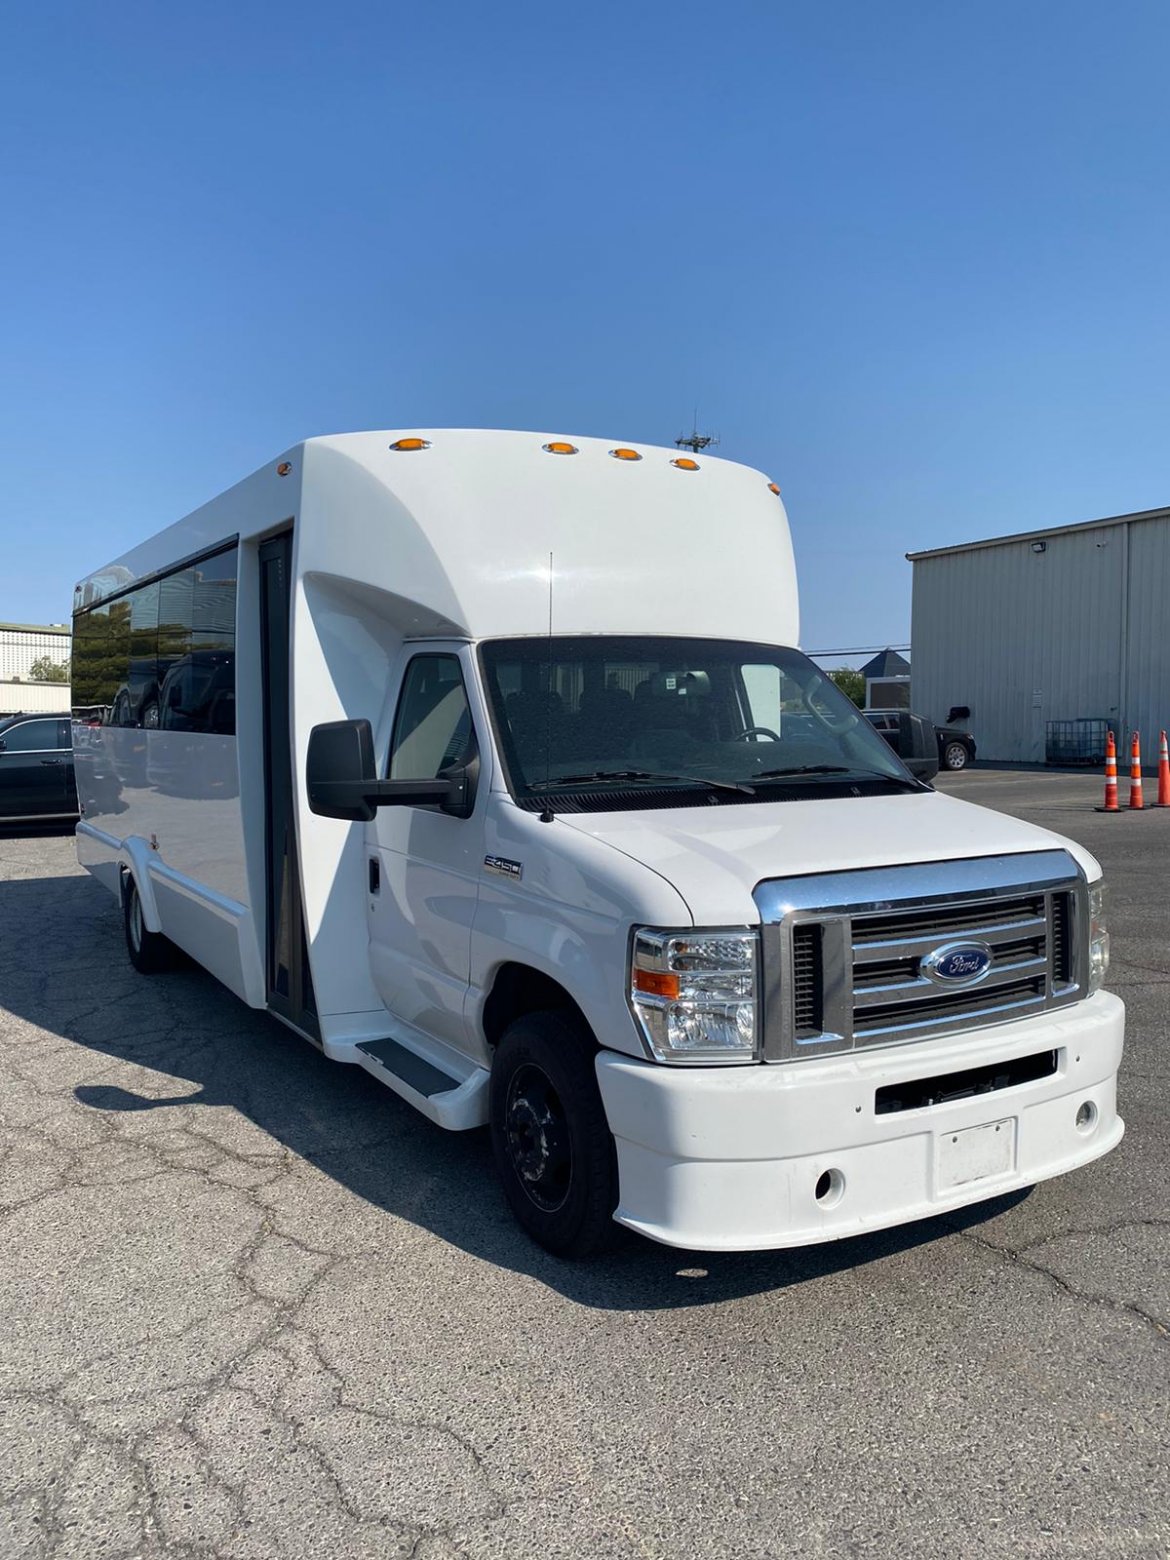 Shuttle Bus for sale: 2016 Ford Ford E-450 by Tiffany